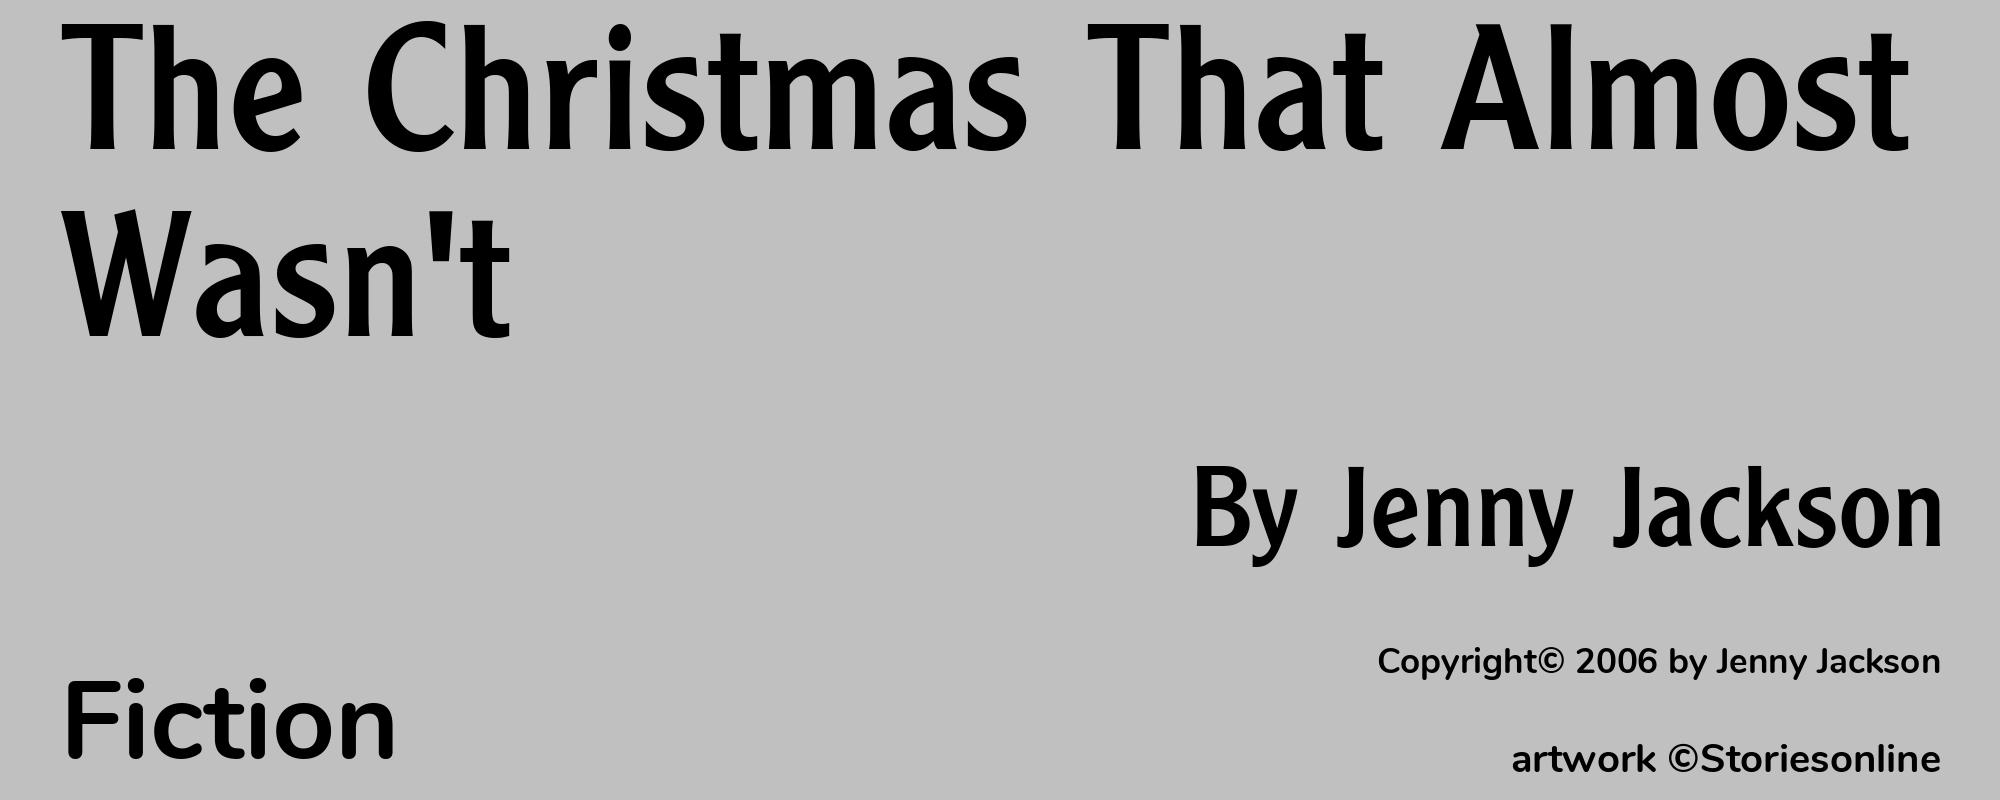 The Christmas That Almost Wasn't - Cover